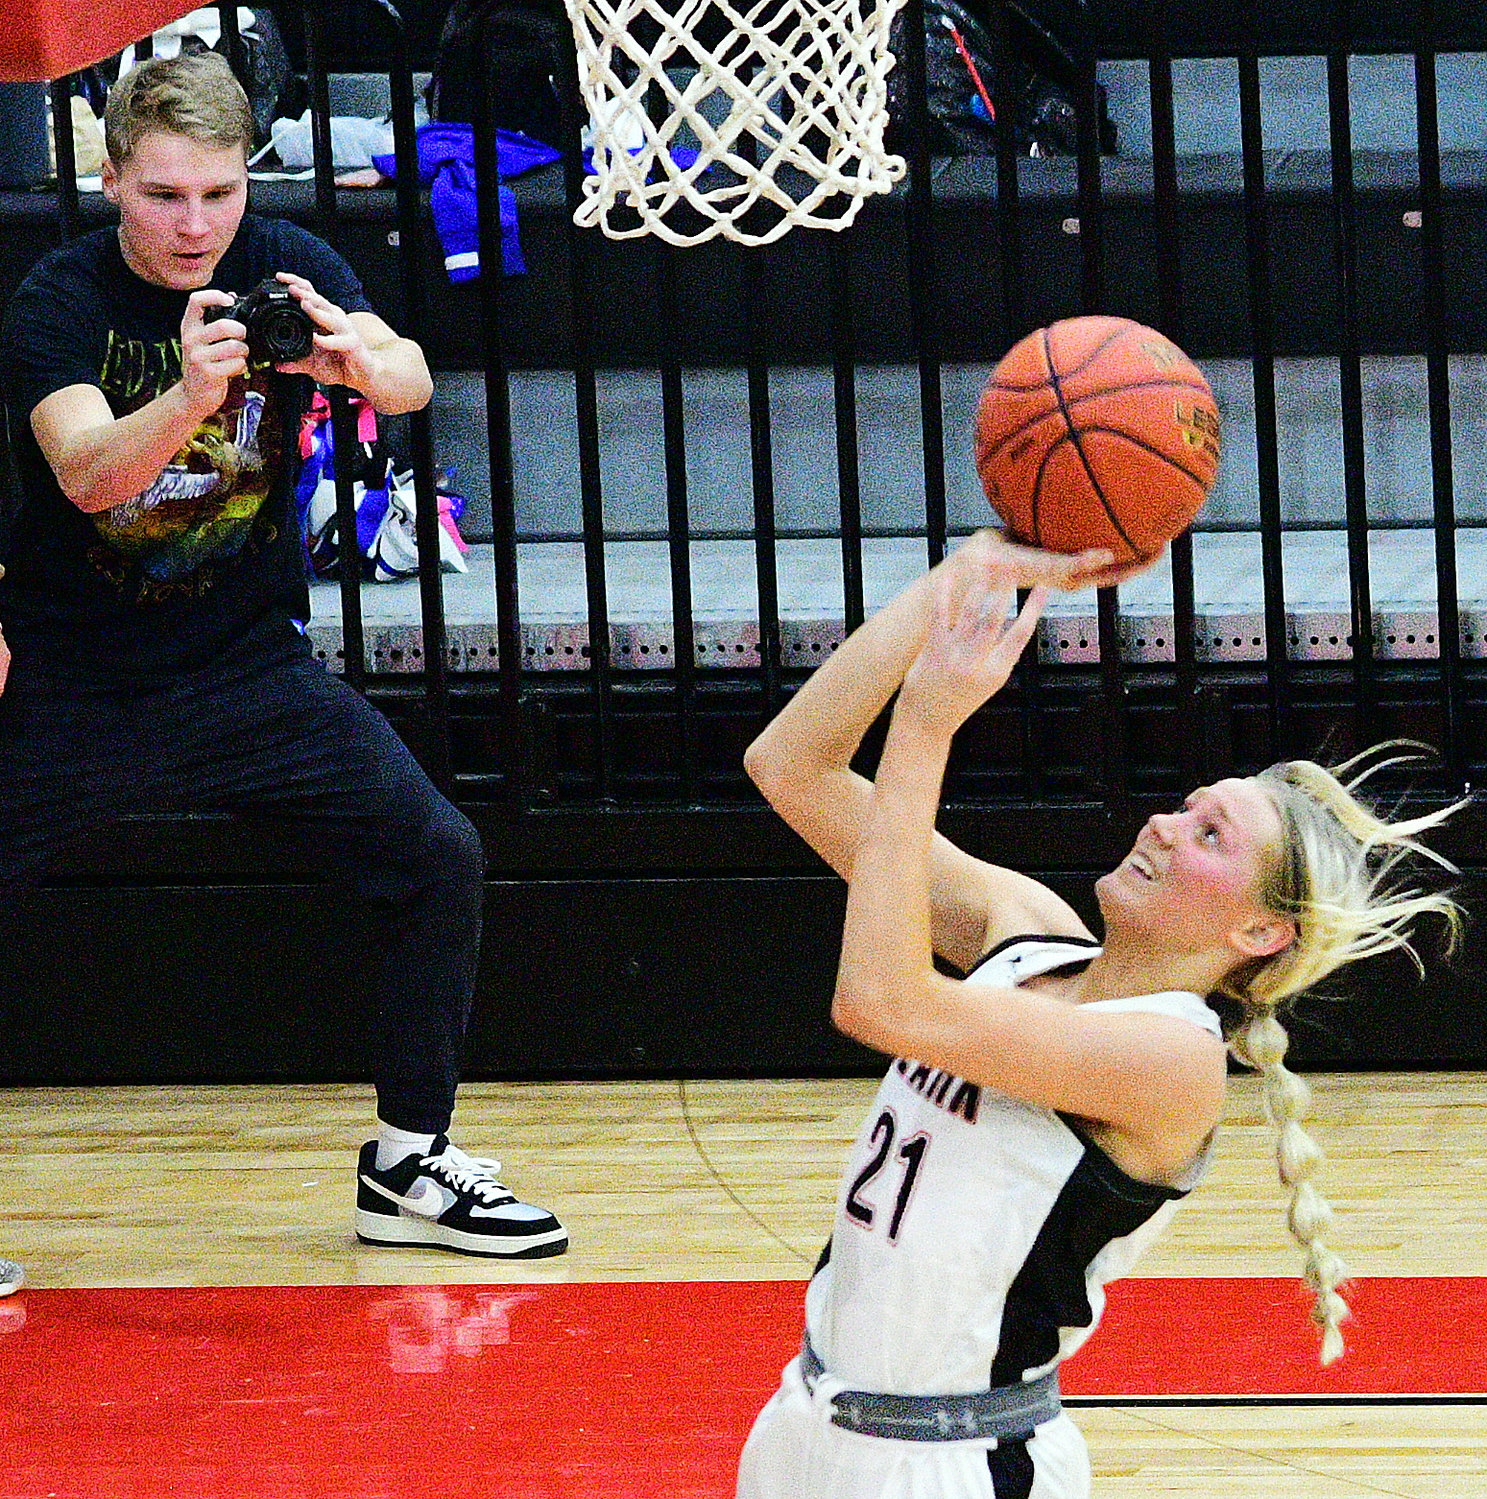 ZEFFIE KENT scores two of her 13 points as Ozark boys basketball player Nash Rodebush catches the action on his camera.